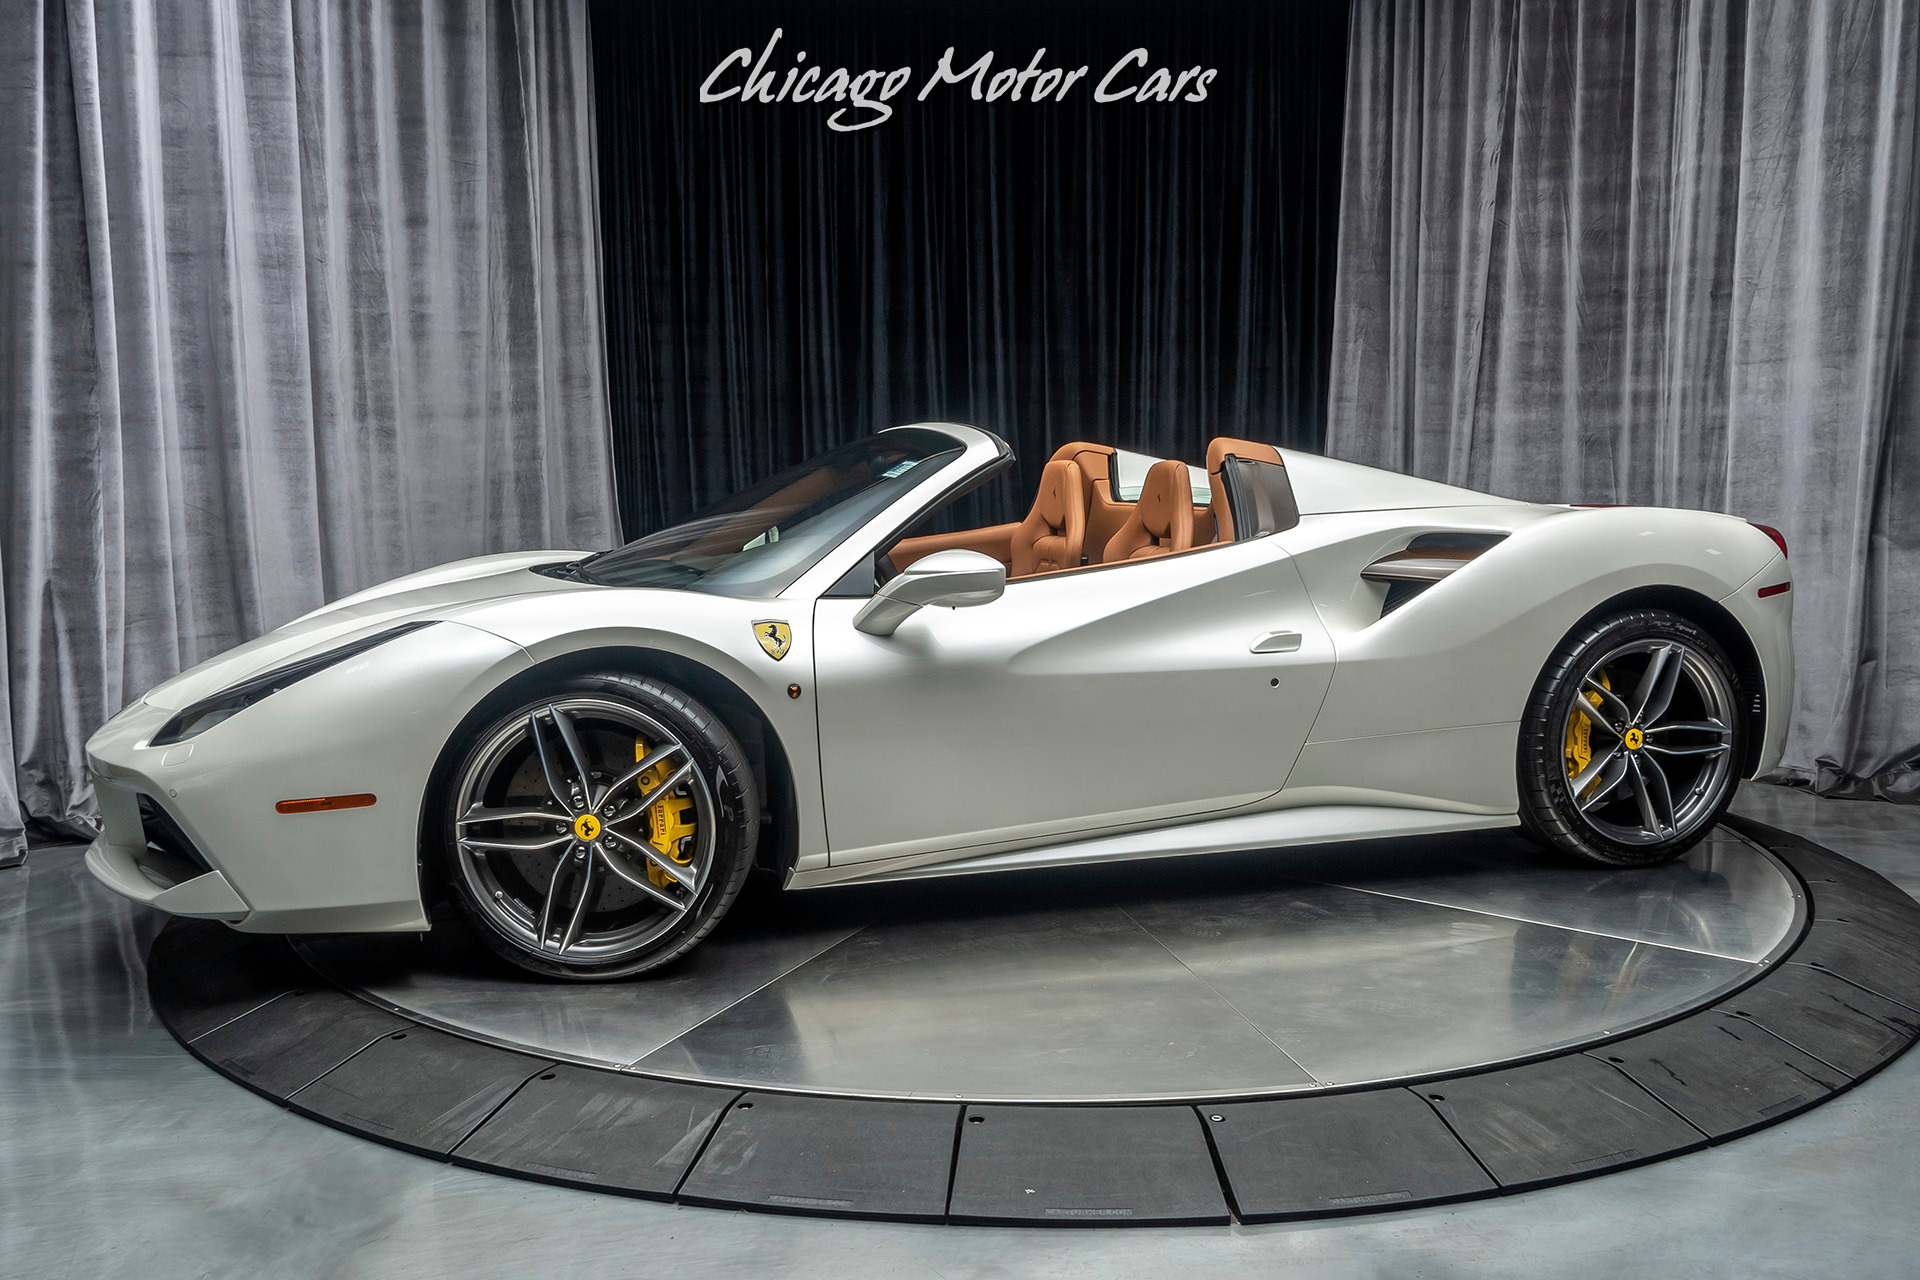 Used 2017 Ferrari 488 Spider Convertible Only 3800 Miles! MSRP $409k